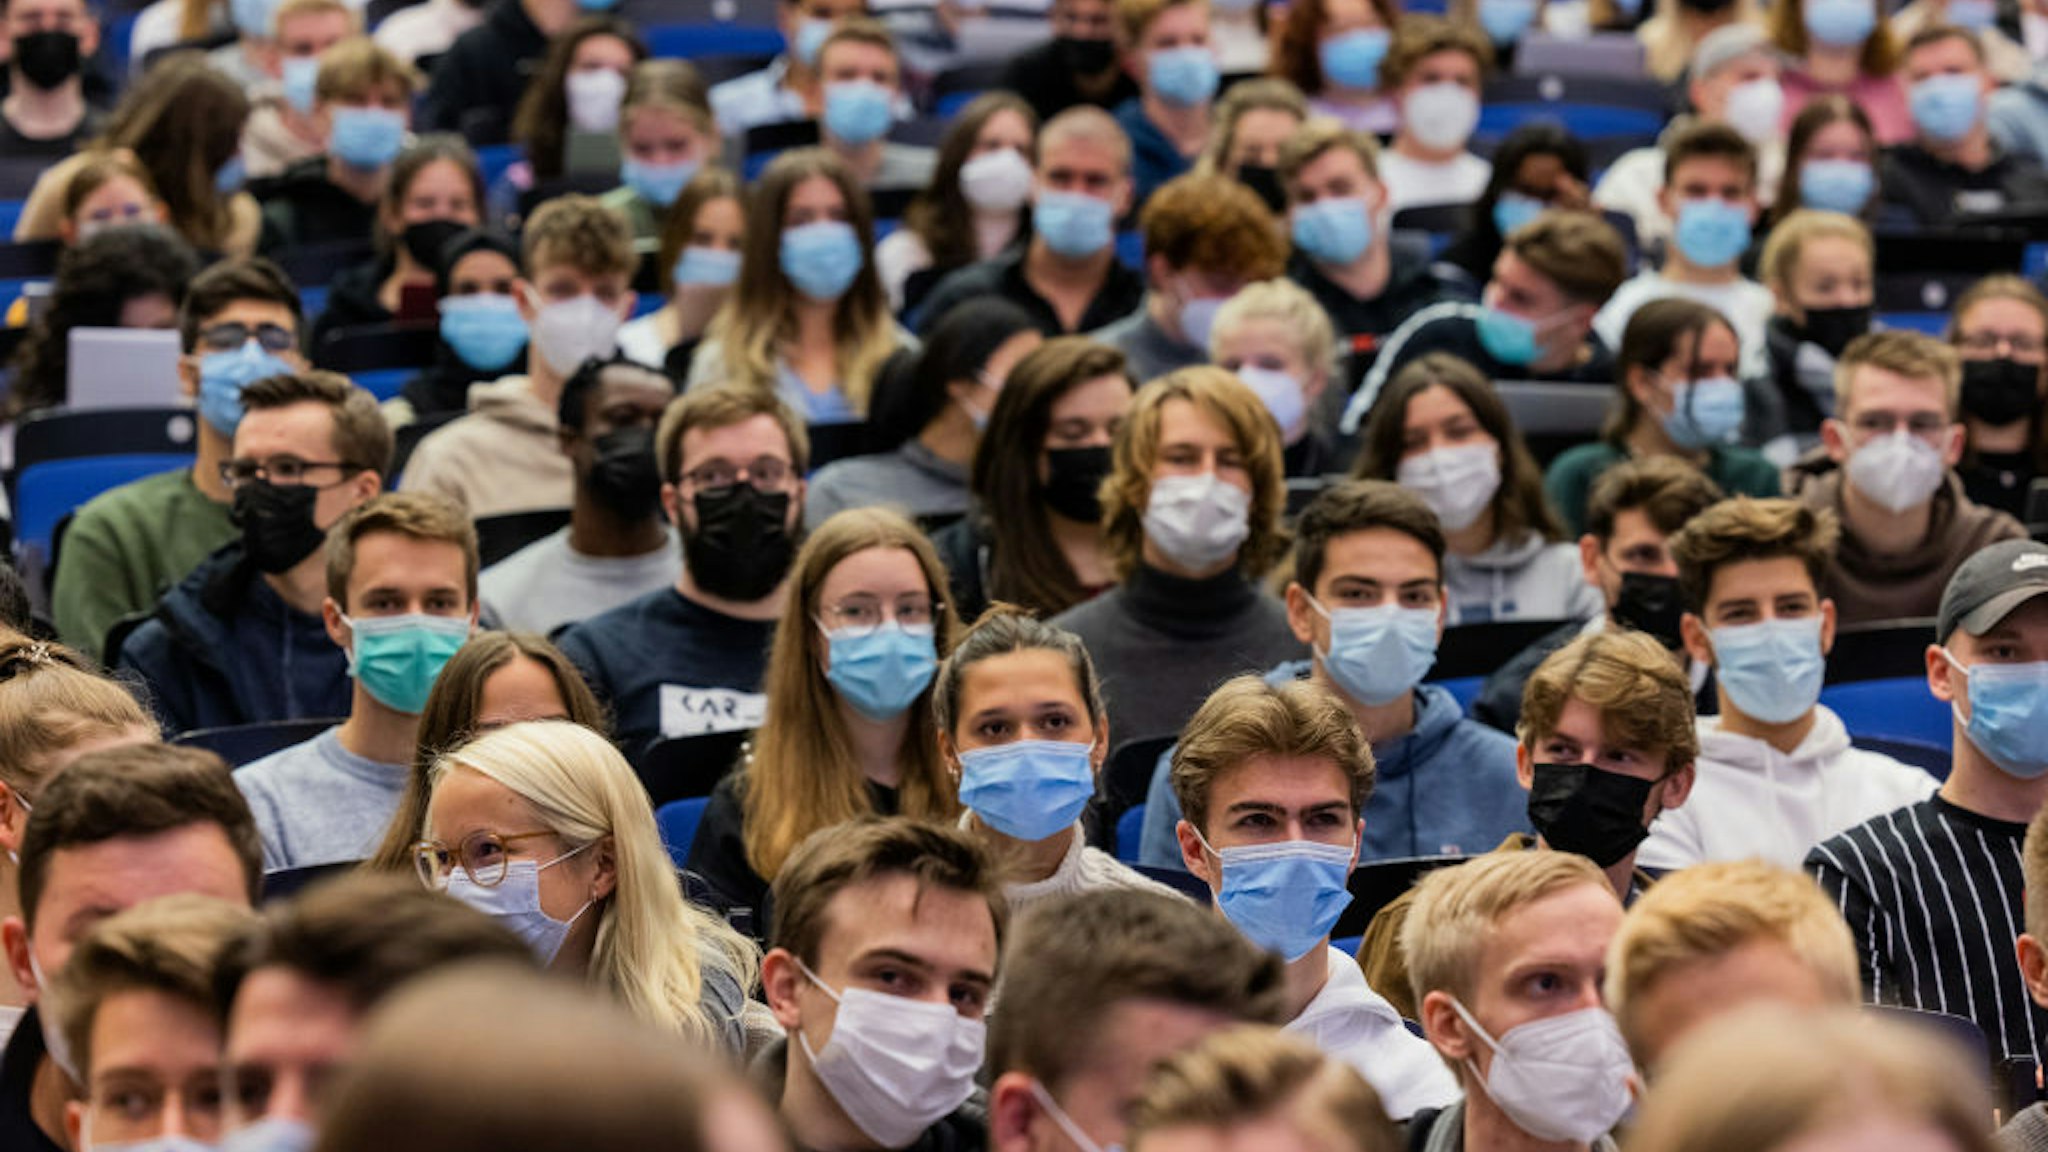 11 October 2021, North Rhine-Westphalia, Münster: Students wear mouth-to-nose coverings while sitting close to each other during the lecture "BWL 1" in lecture hall H1 of the Westfälische Wilhelms-Universität (WWU). For the first time since the beginning of the Corona pandemic, lectures in the winter semester 21/22 have started in presence under 3G conditions. Photo: Rolf Vennenbernd/dpa (Photo by Rolf Vennenbernd/picture alliance via Getty Images)